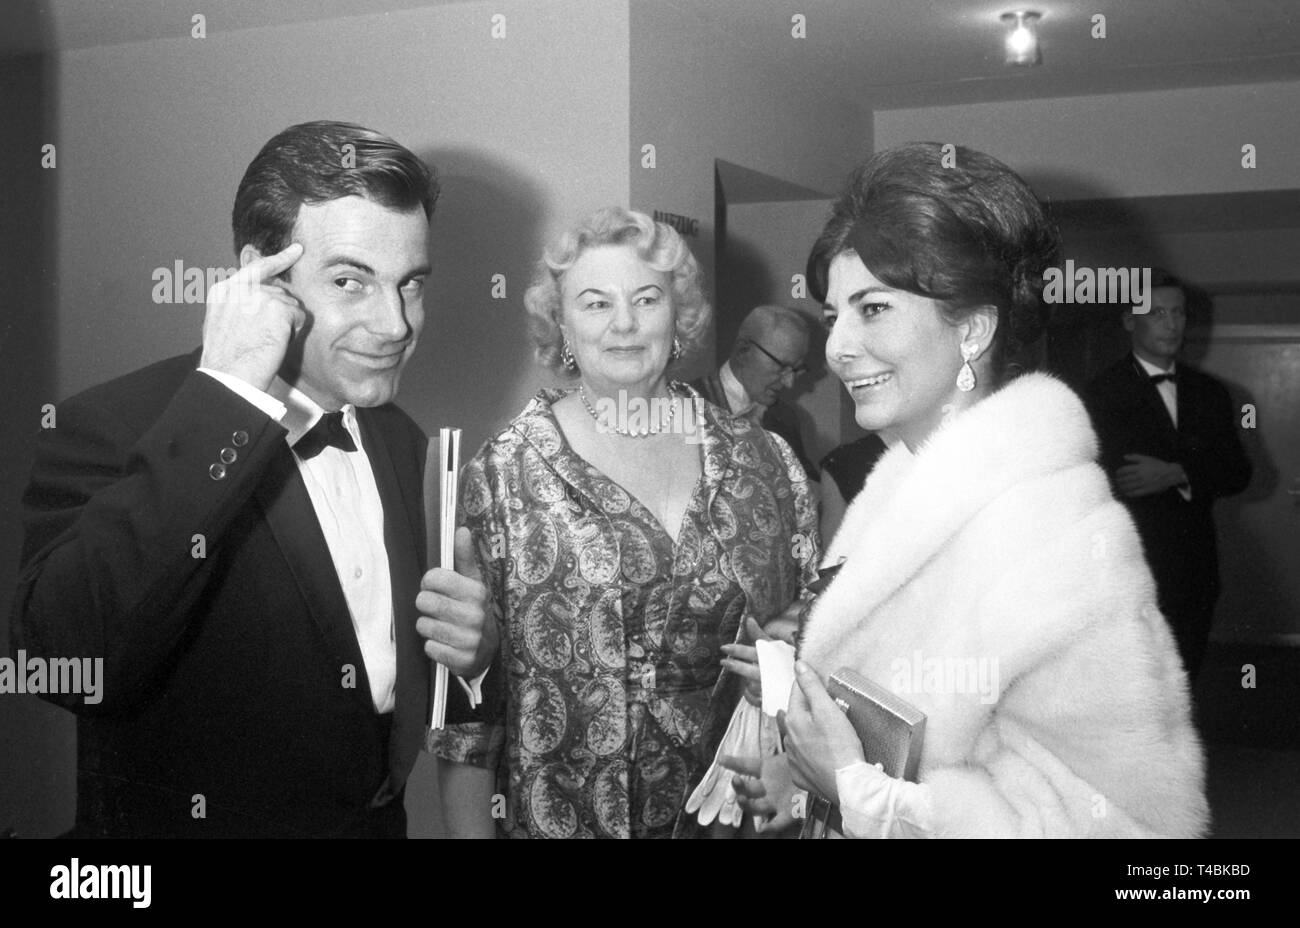 The re-built National Theatre in Munich is opened in a ceremony on the 23rd of November in 1963. The picture shows actor Maximilian Schell (l), Princess Soraya (r) and her mother Princess Esfandiary (M) at the gala event. | usage worldwide Stock Photo